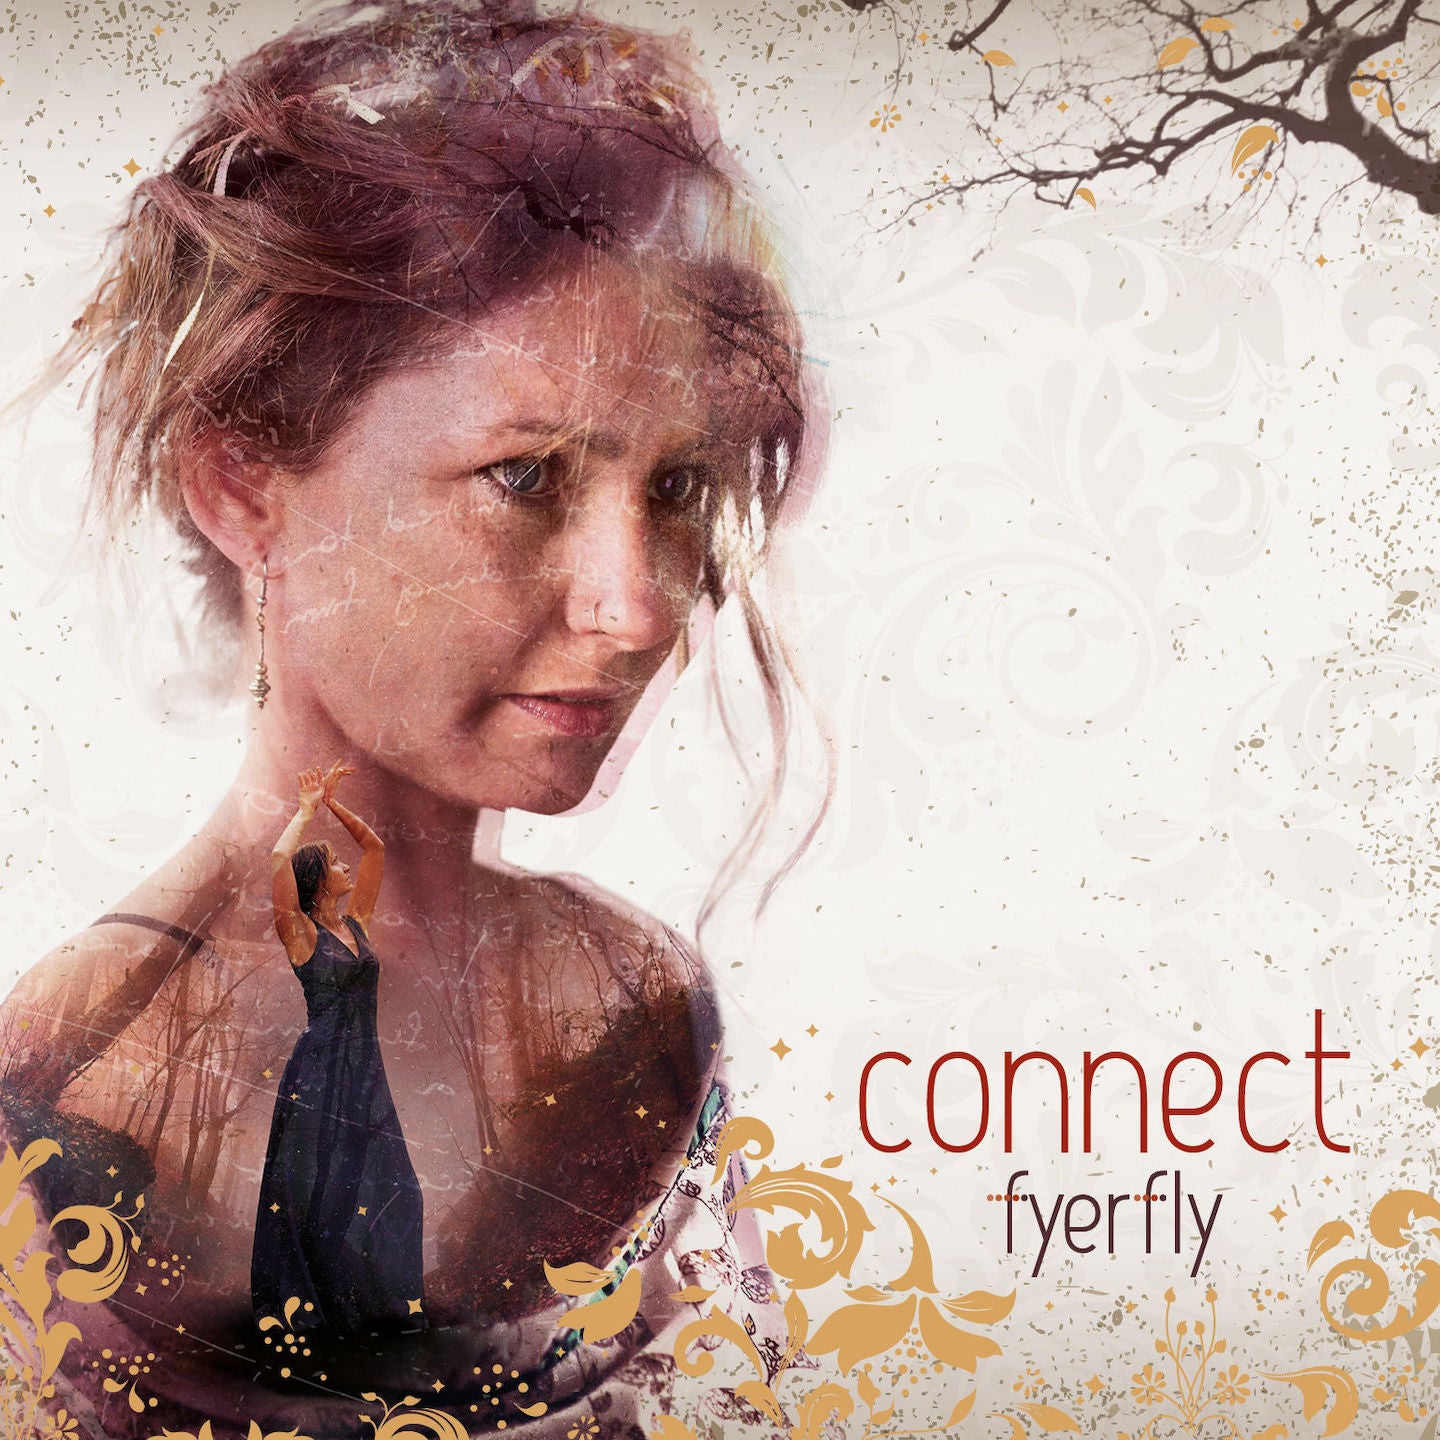 Are You Listening? is from the album 'Connect' by Fyerfly. Infusing elements of Alt Rock, Sadcore, Jazz and Blues, this deeply intimate and sultry album will soothe you as your soul is immersed in its serene and haunting sounds. Get the album.  A song about finding your voice and learning to say no. Bluesy, jazz styled swing that you can imagine performed in a dark smokey joint.